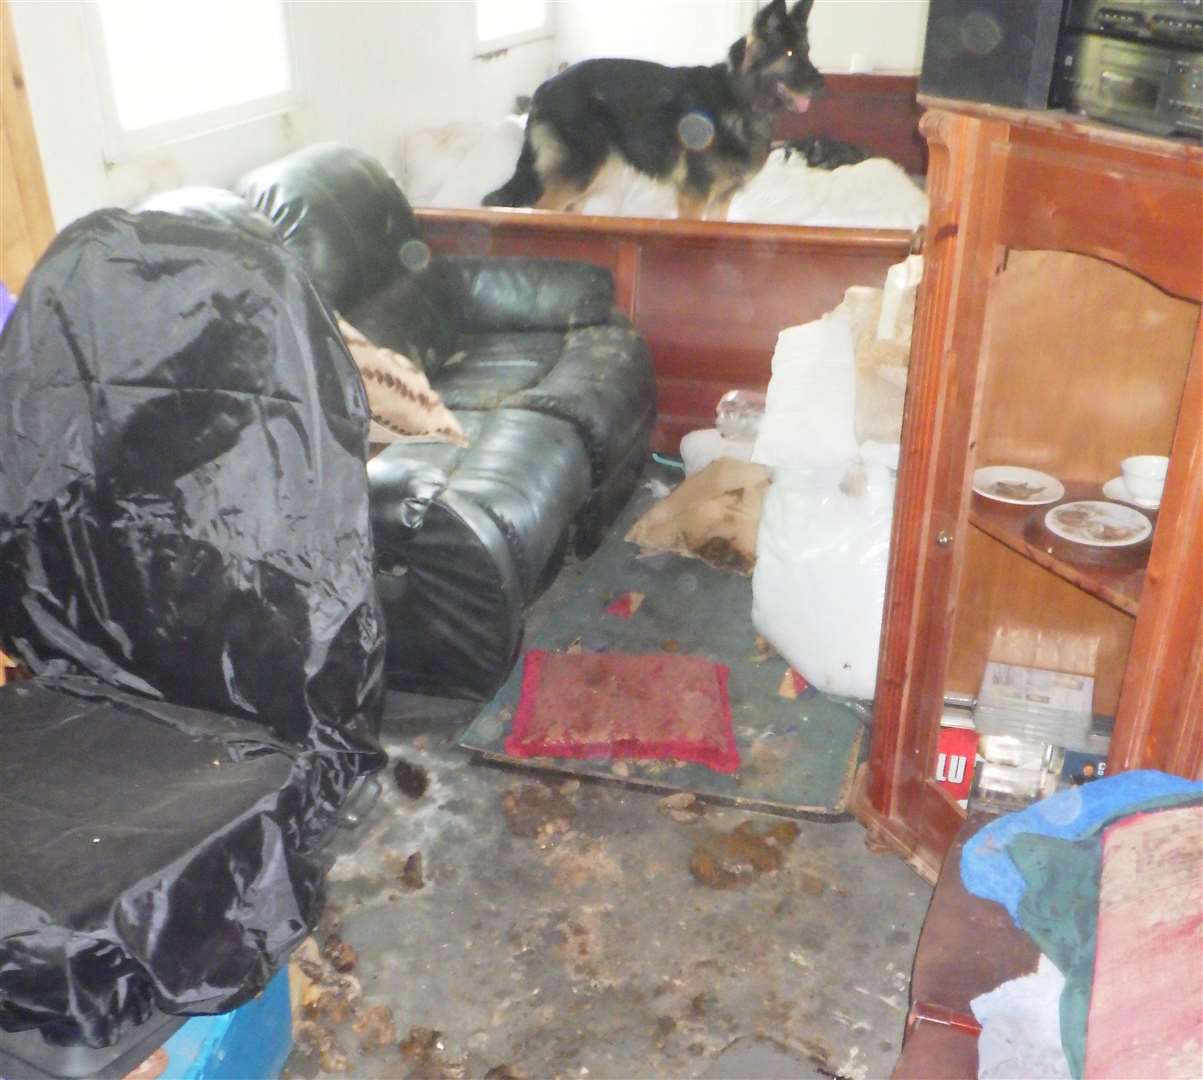 Dogs were kept in rooms with surfaces and furniture covered in excrement and, in most cases, without water